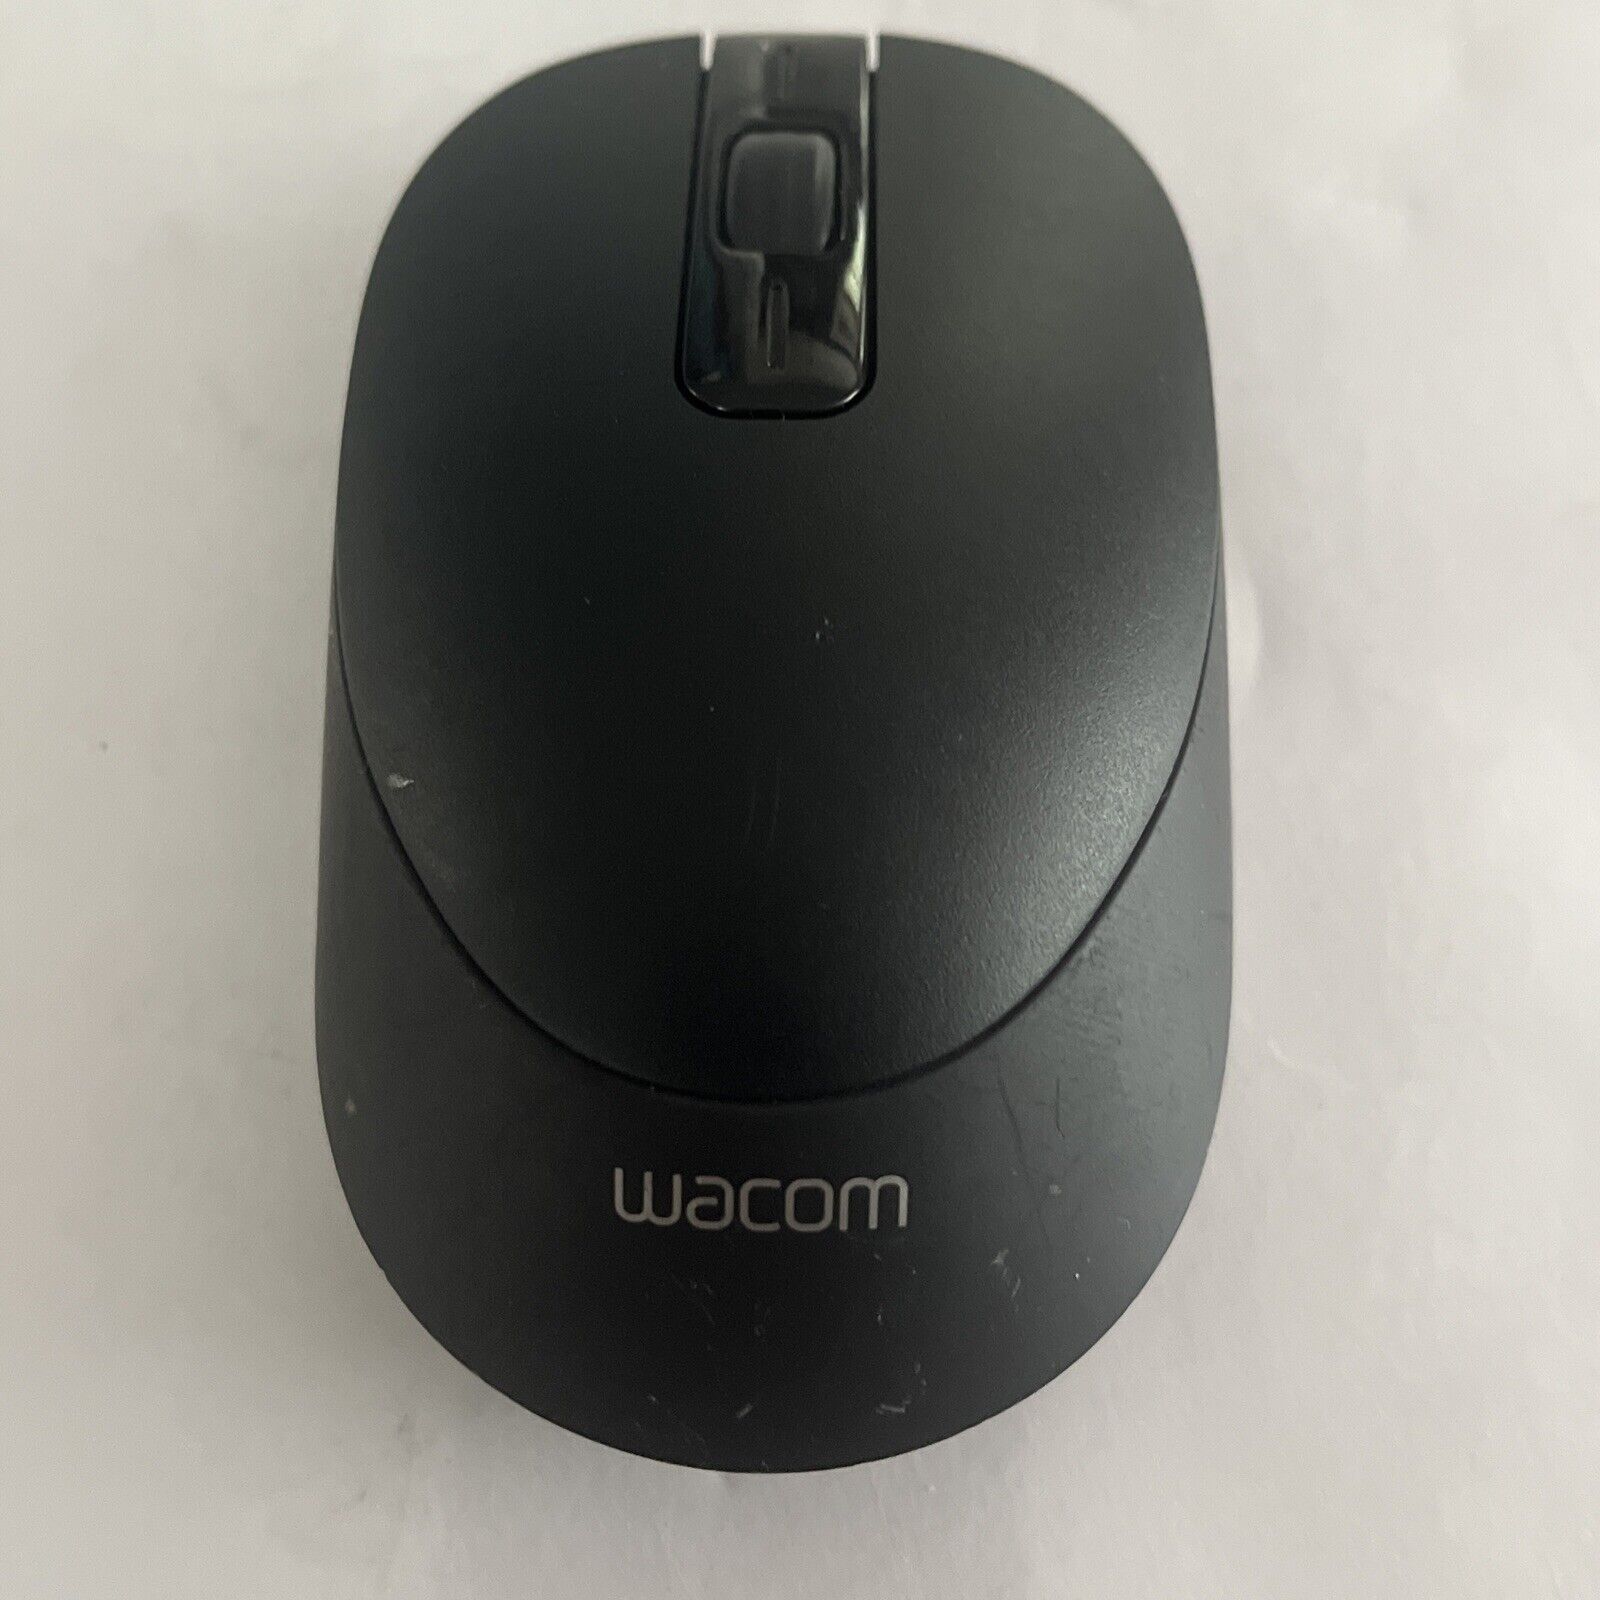 Wireless Wacom KC-100-00 Mouse for Intuos 4 / 5 / Pro Drawing Tablet Mouse Only